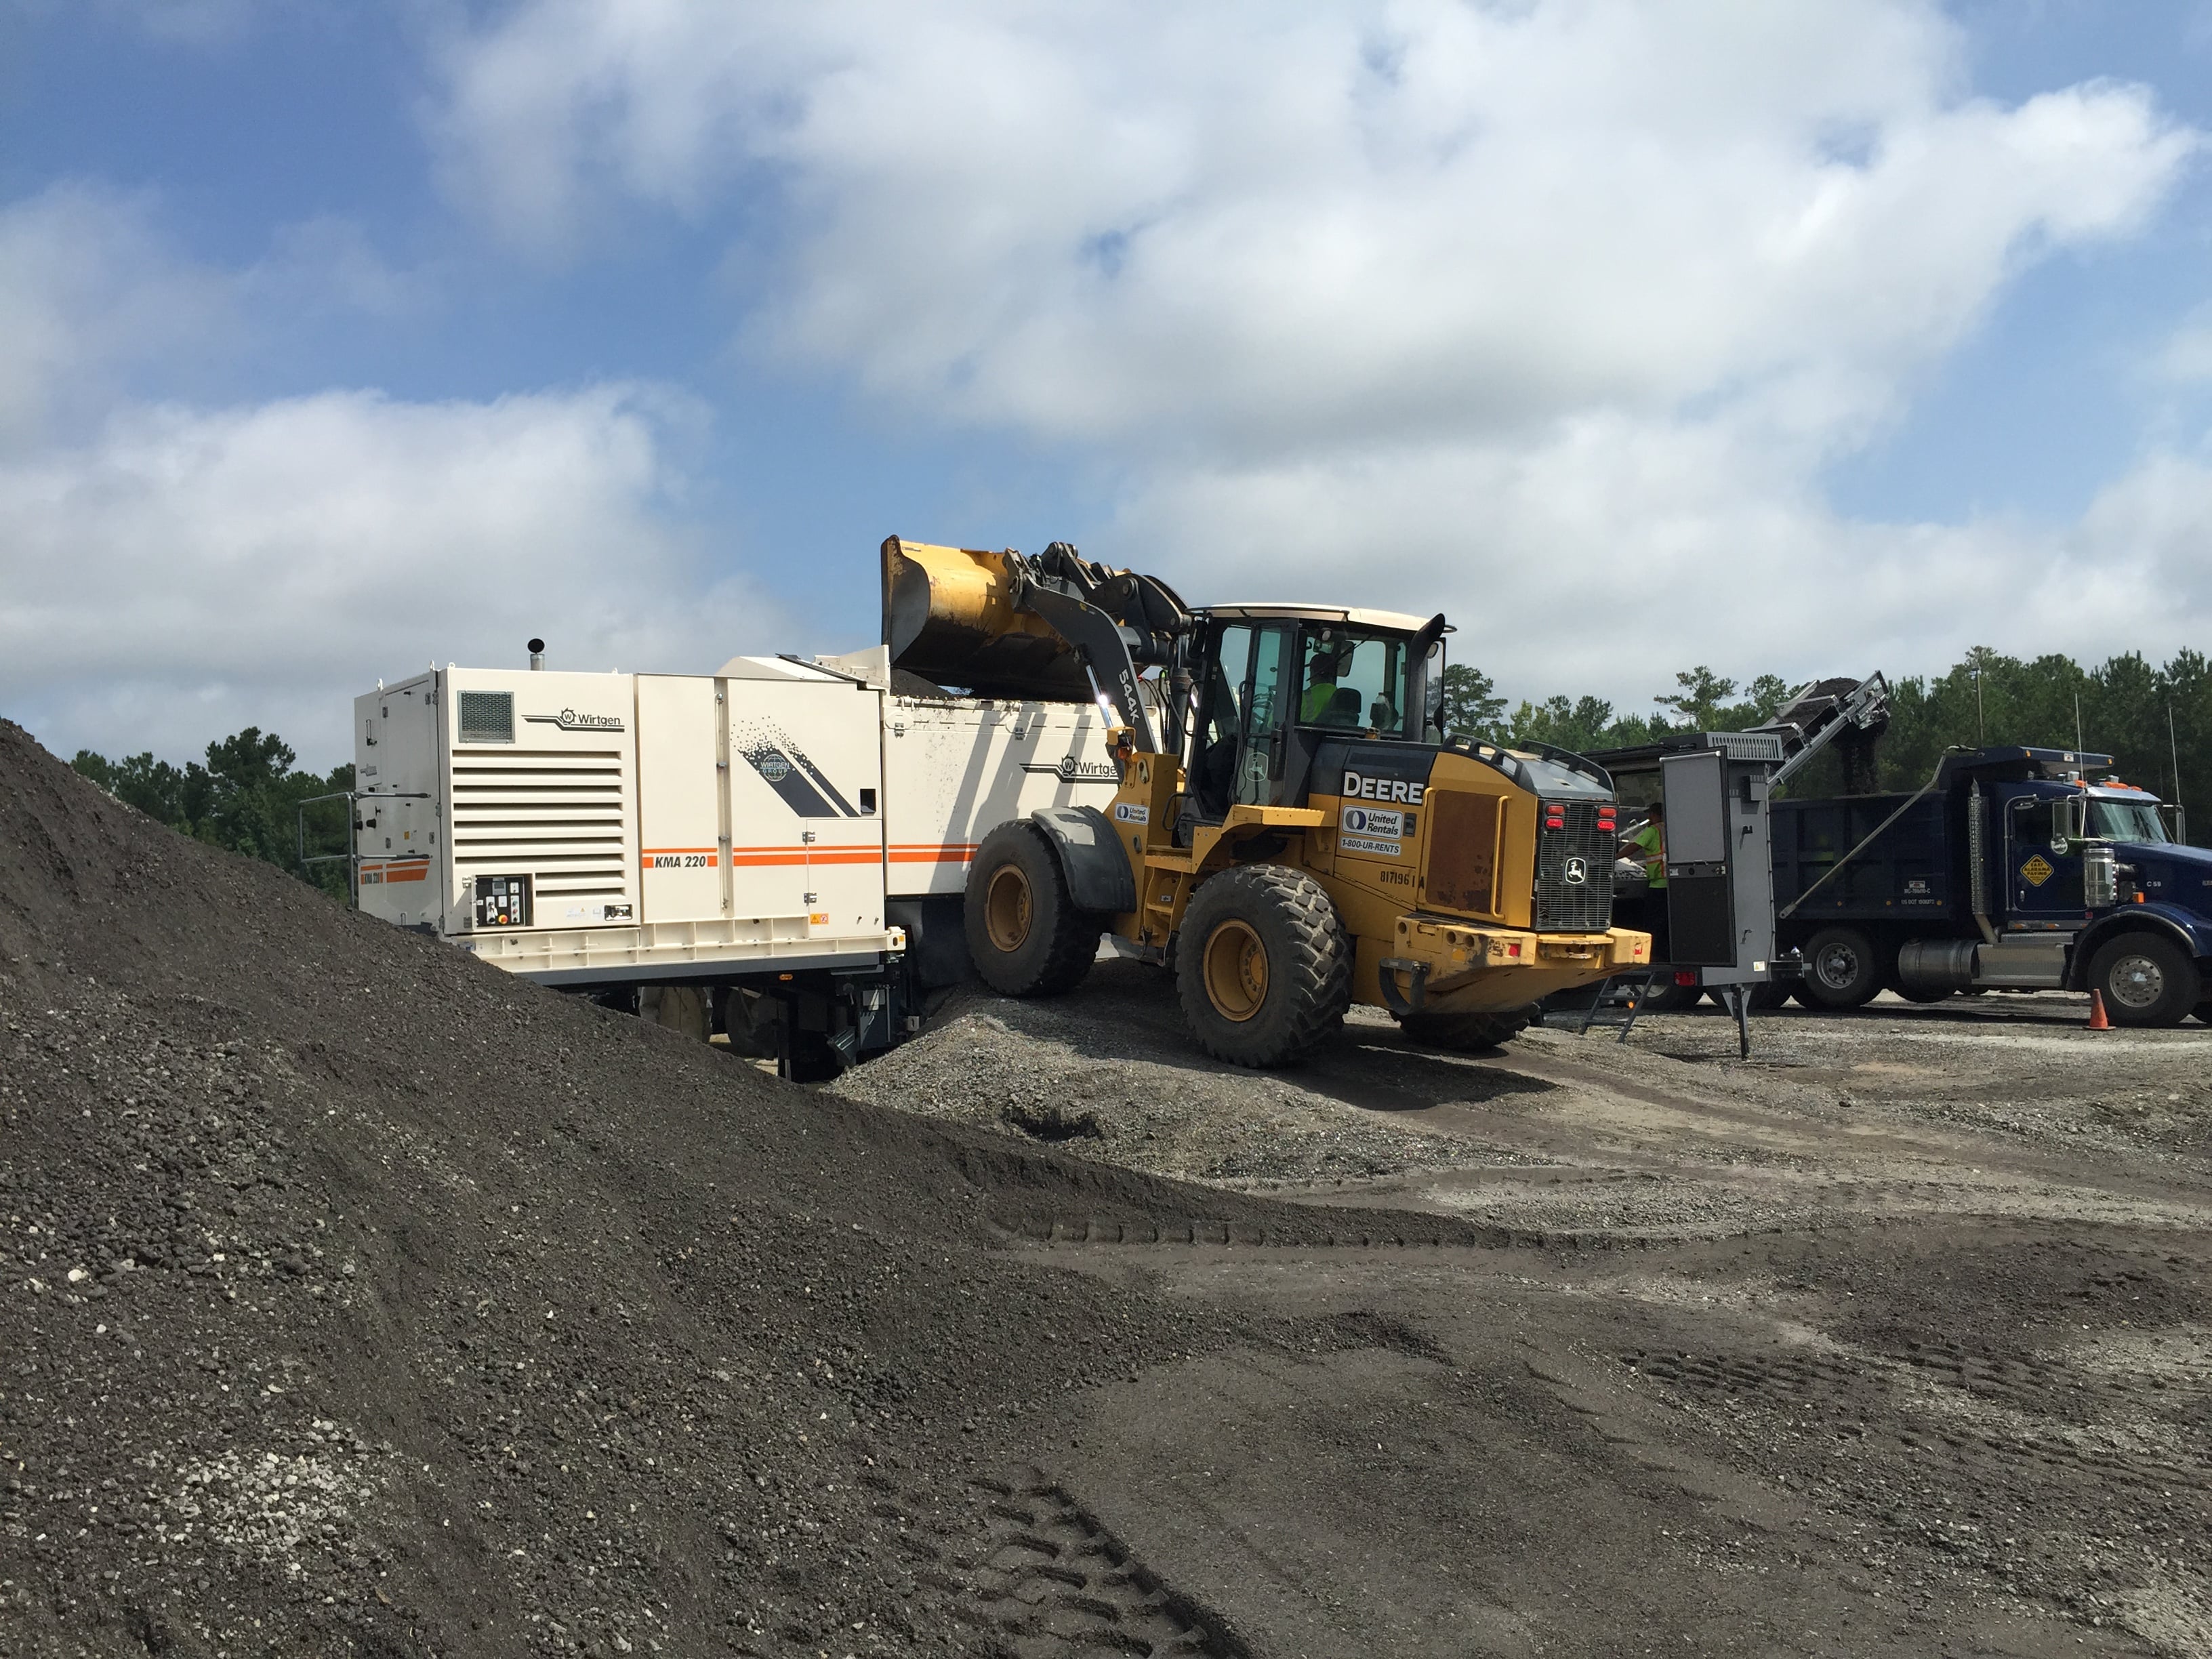 An image of a worker operating a backhoe to place Reclaimed Asphalt Pavement (RAP) in a white metal mobile cold recycling plant where it is mixed with a liquid, such as asphalt emulsion or foamed asphalt, and a small amount of cement to create a new flexible asphalt base